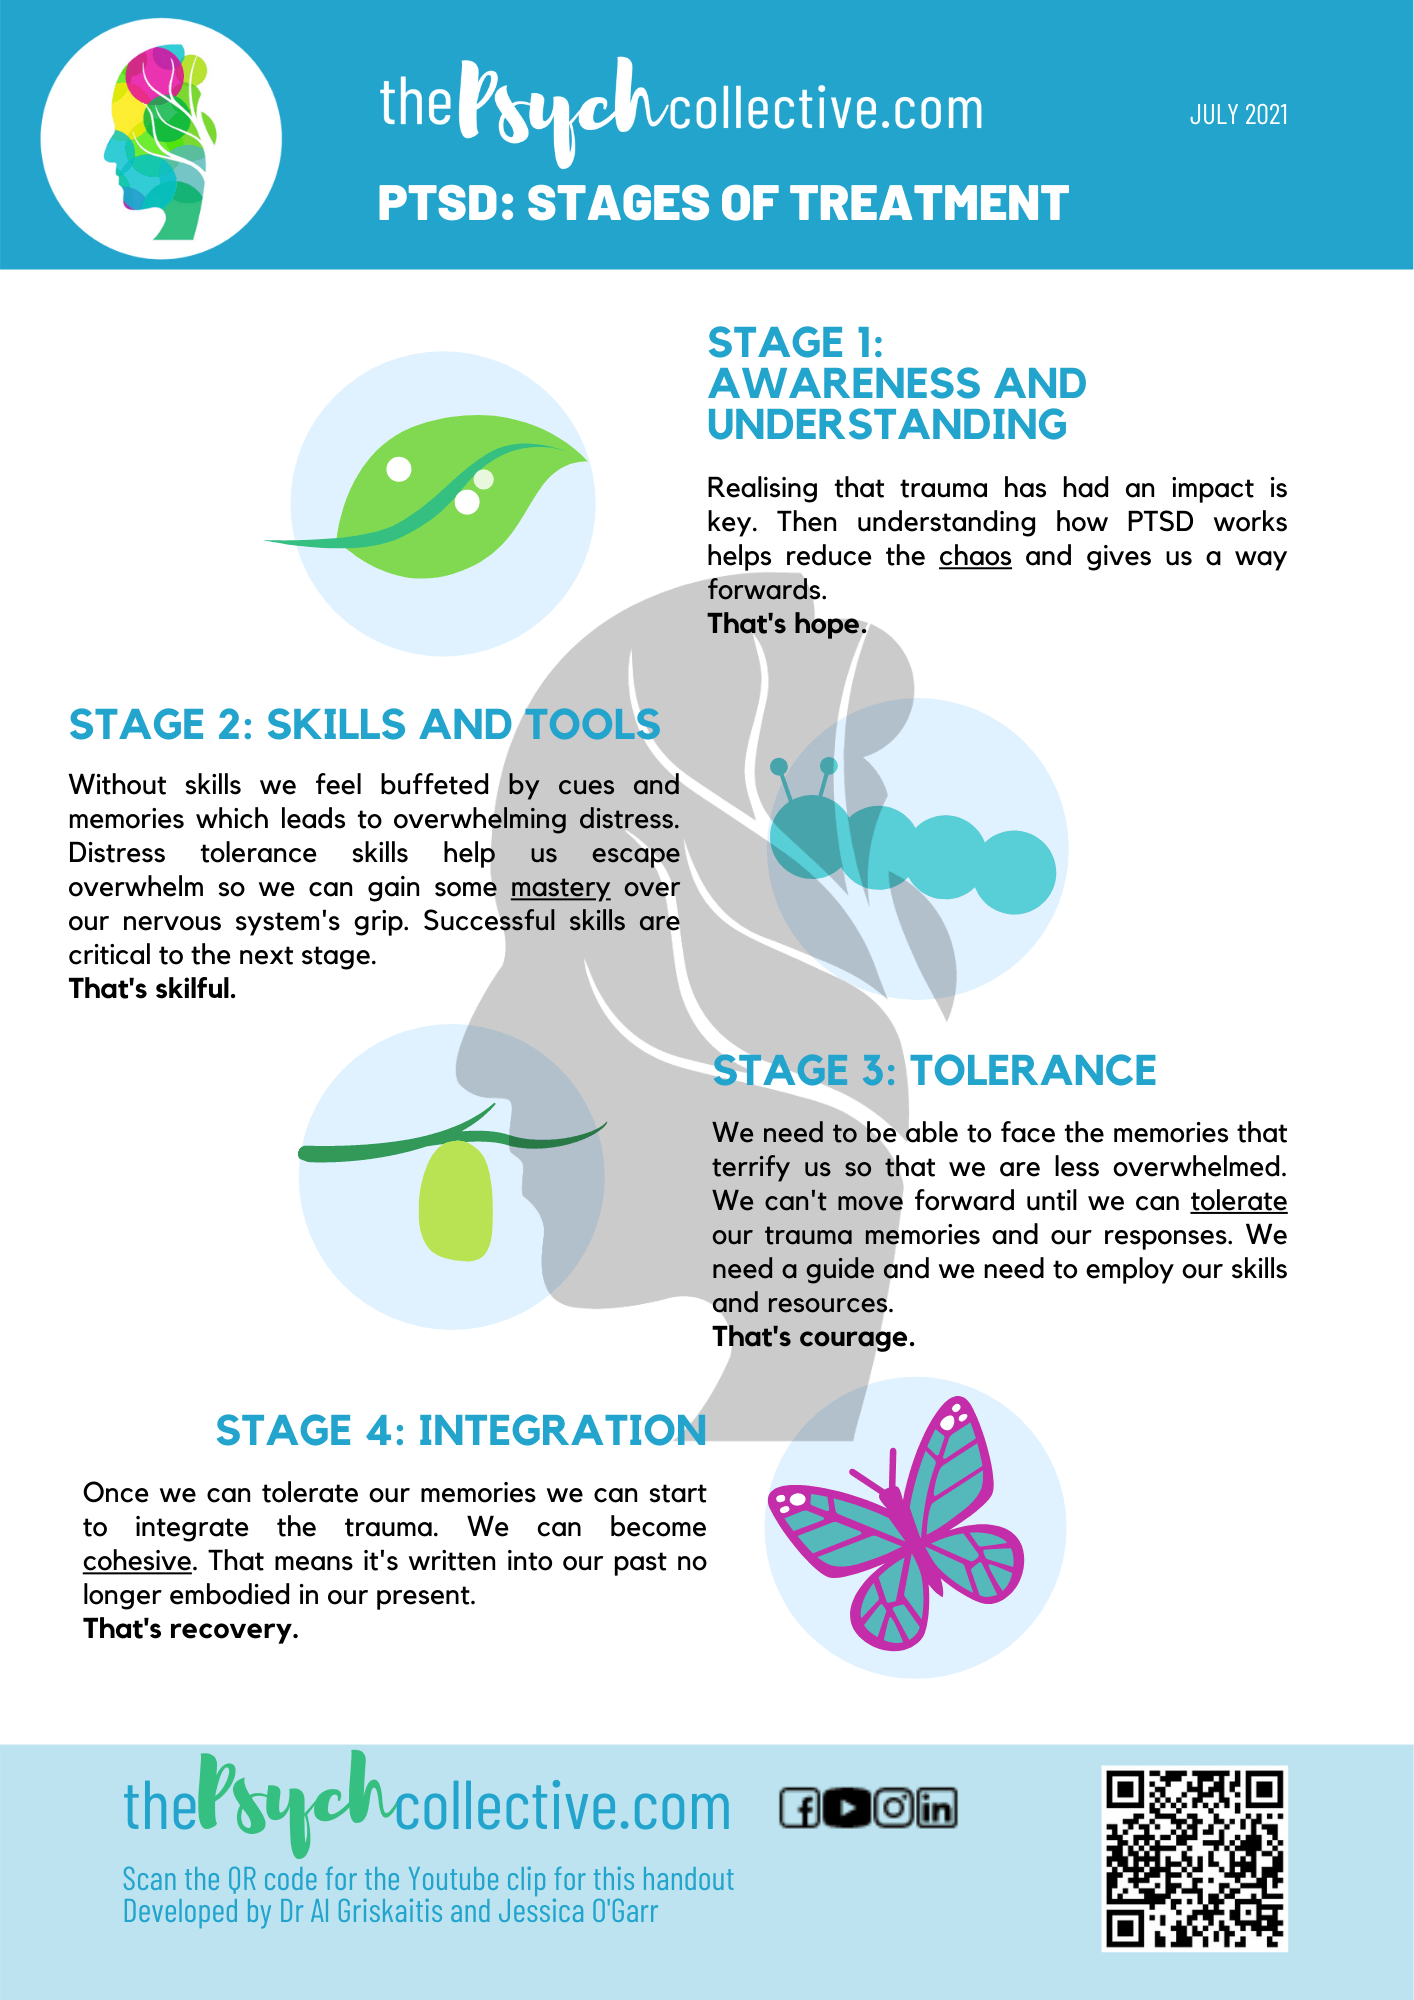 PTSD: Stages of Treatment handout